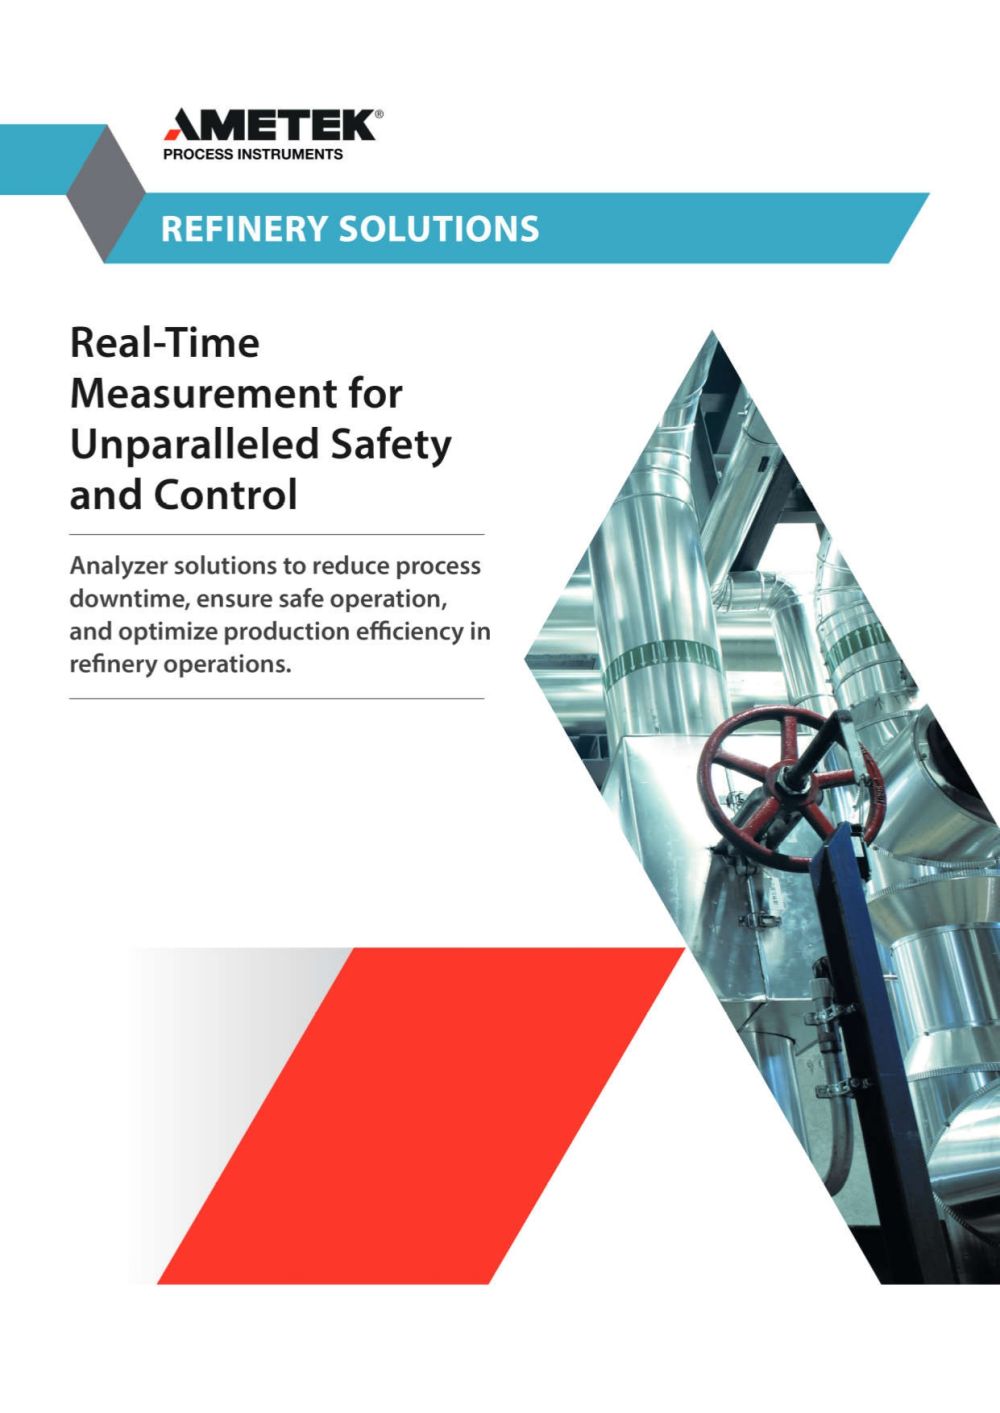 Real-time measurement for unparalleled safety and control